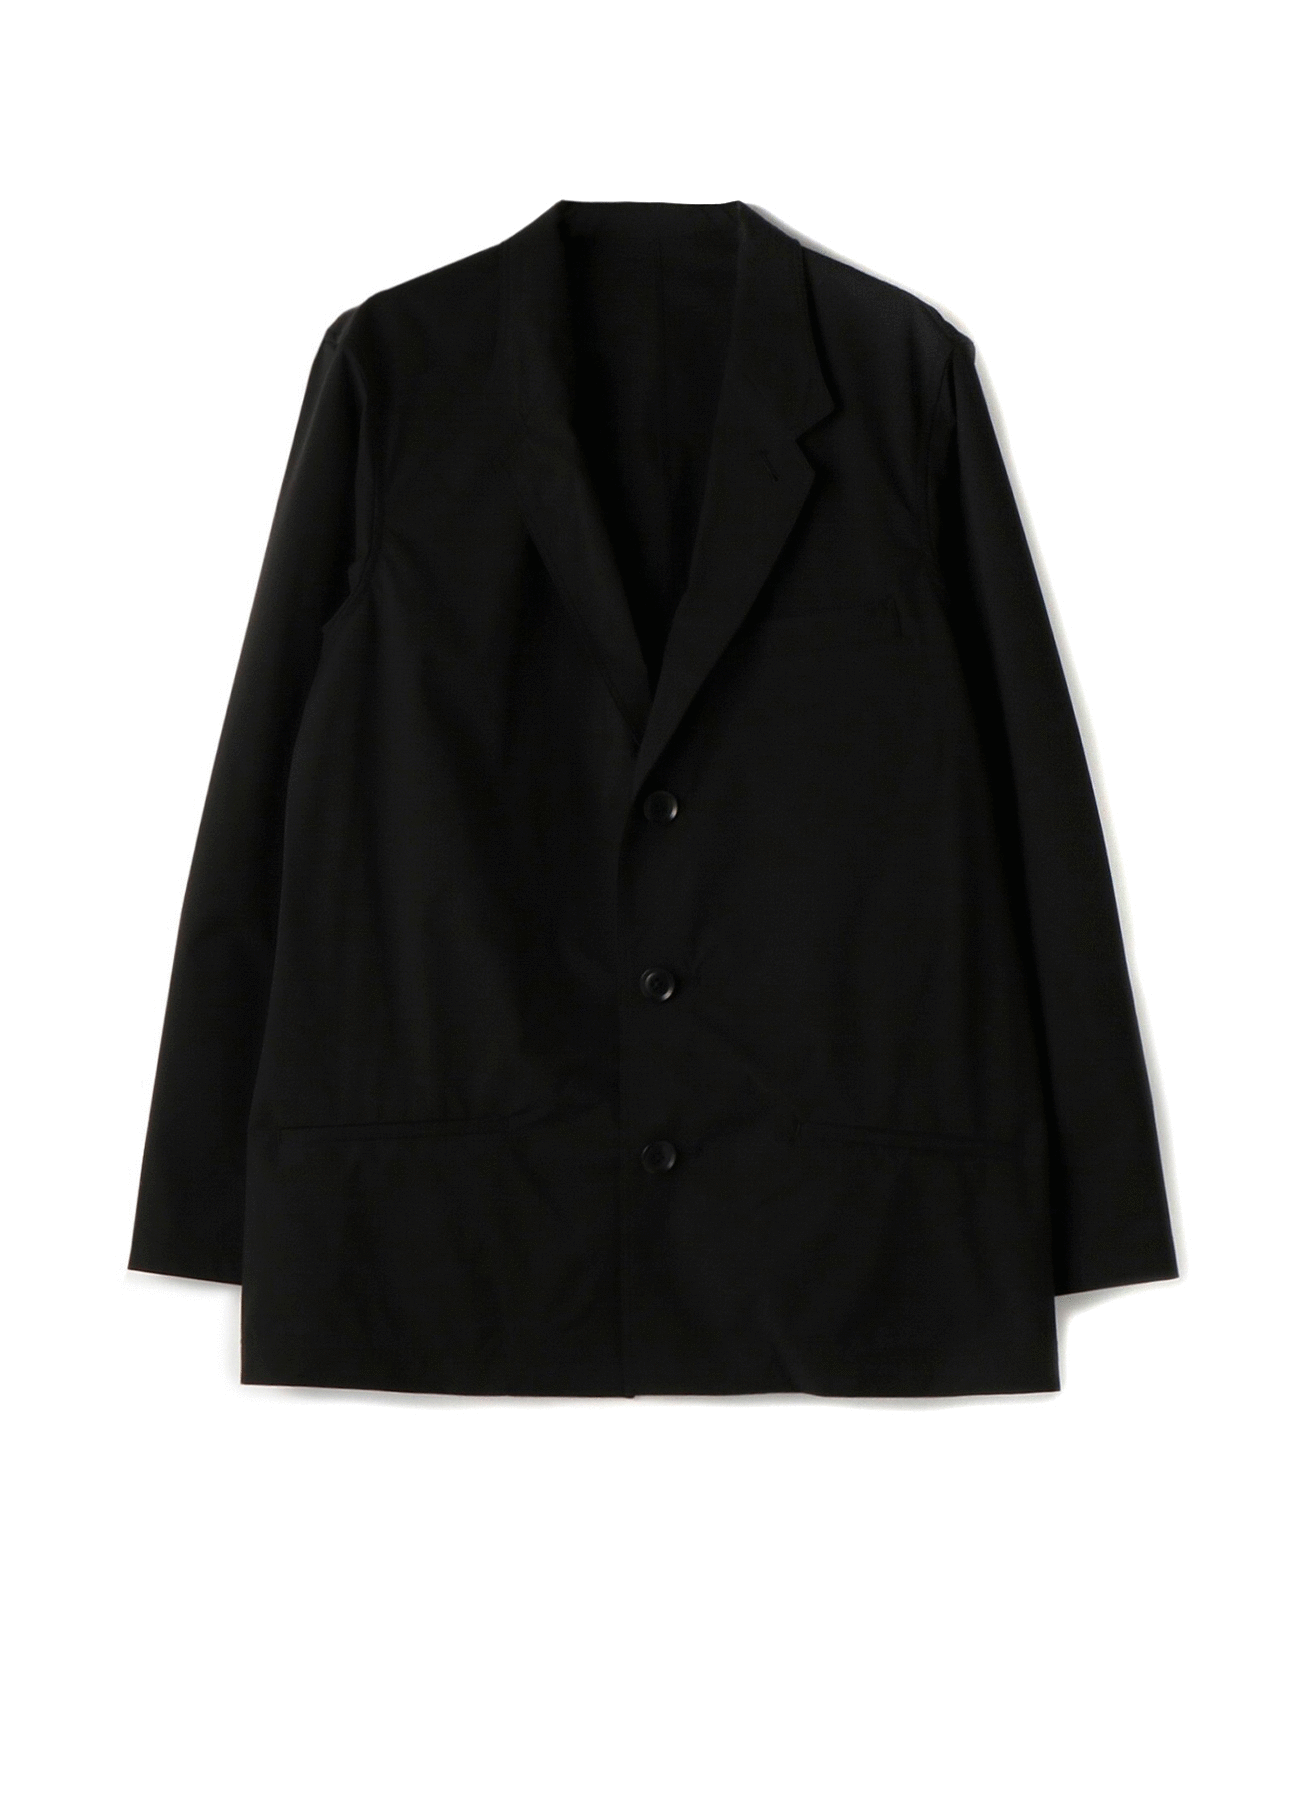 Solotex Packable Traveler 3BS Tailored Shirt Jacket (S Black): S 